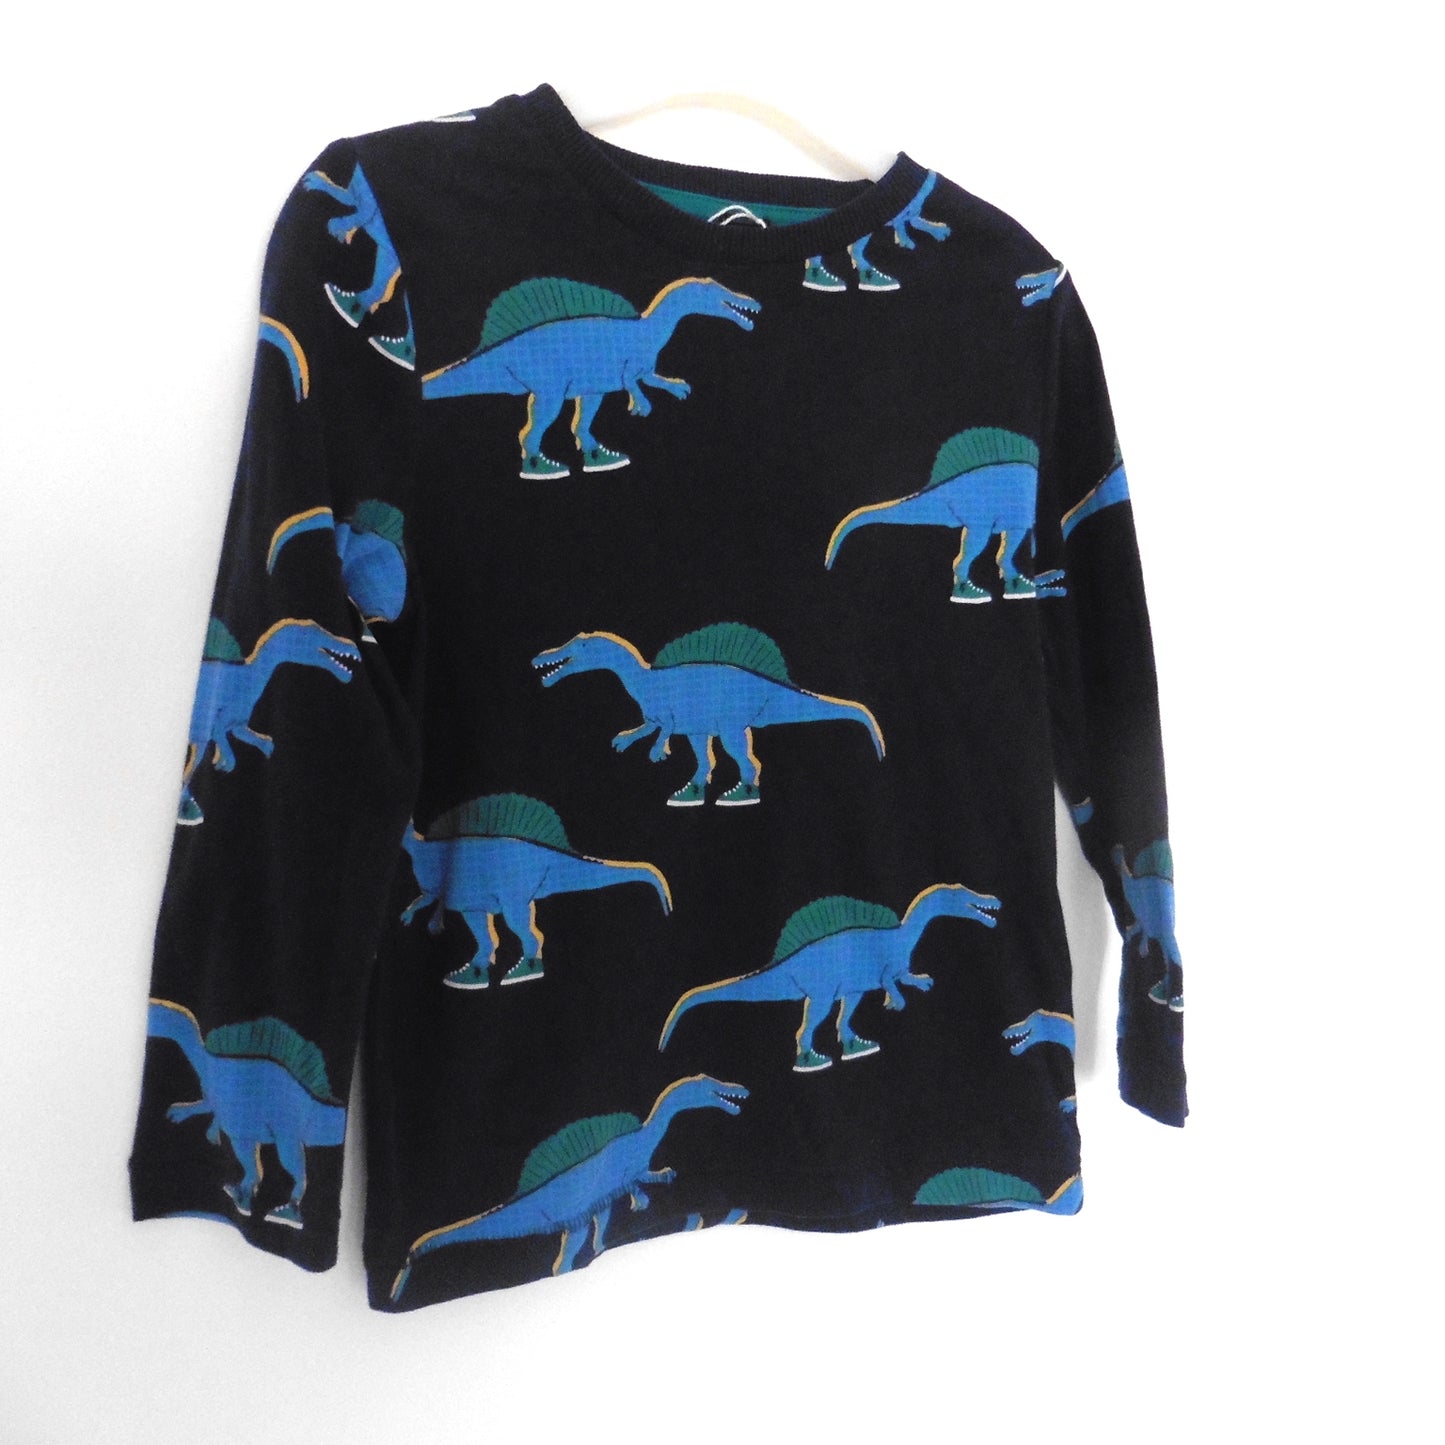 M&S Navy Long Sleeve Top with Dinosaurs 2-3y